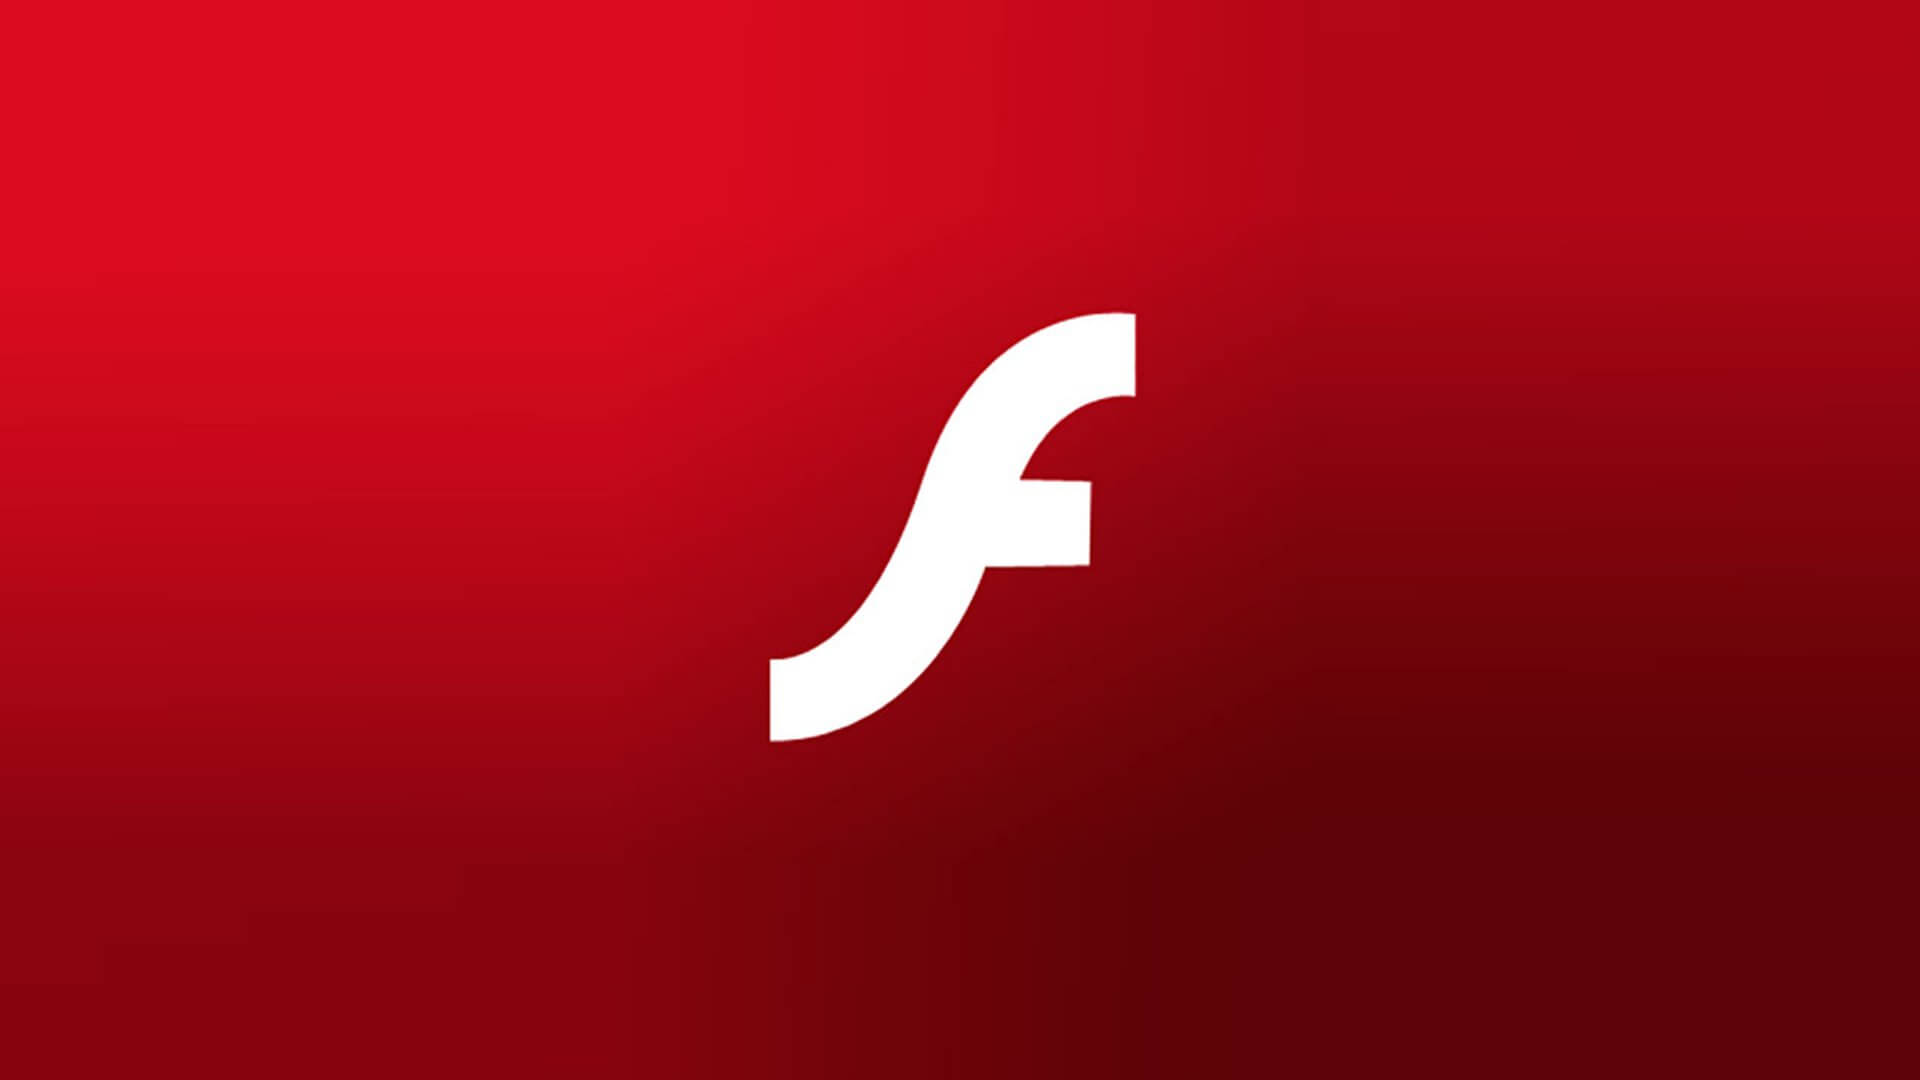 adobe flash player 11.3 free download for windows 7